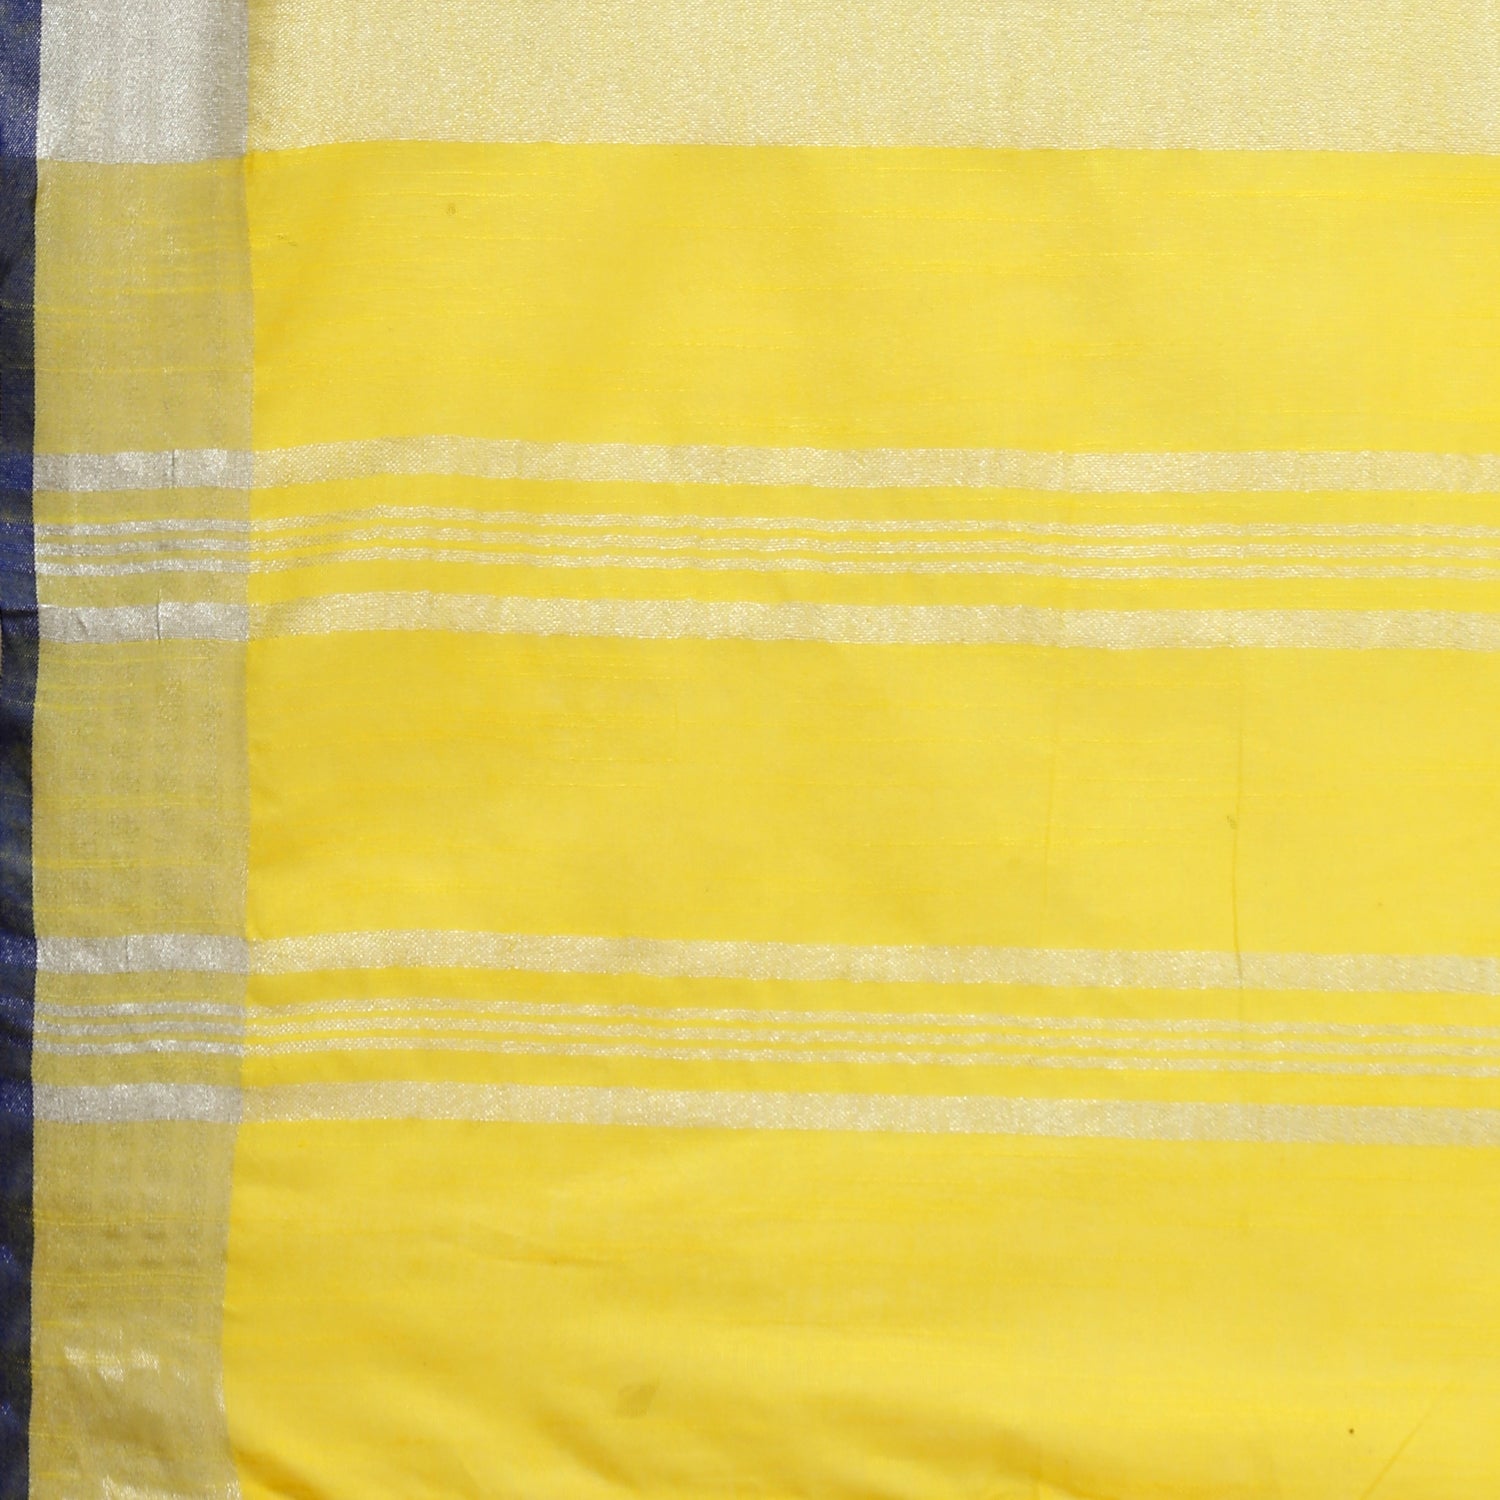 Women's self Woven Solid Textured Daily Wear Cotton Linen Sari With Blouse Piece (Yellow) - NIMIDHYA